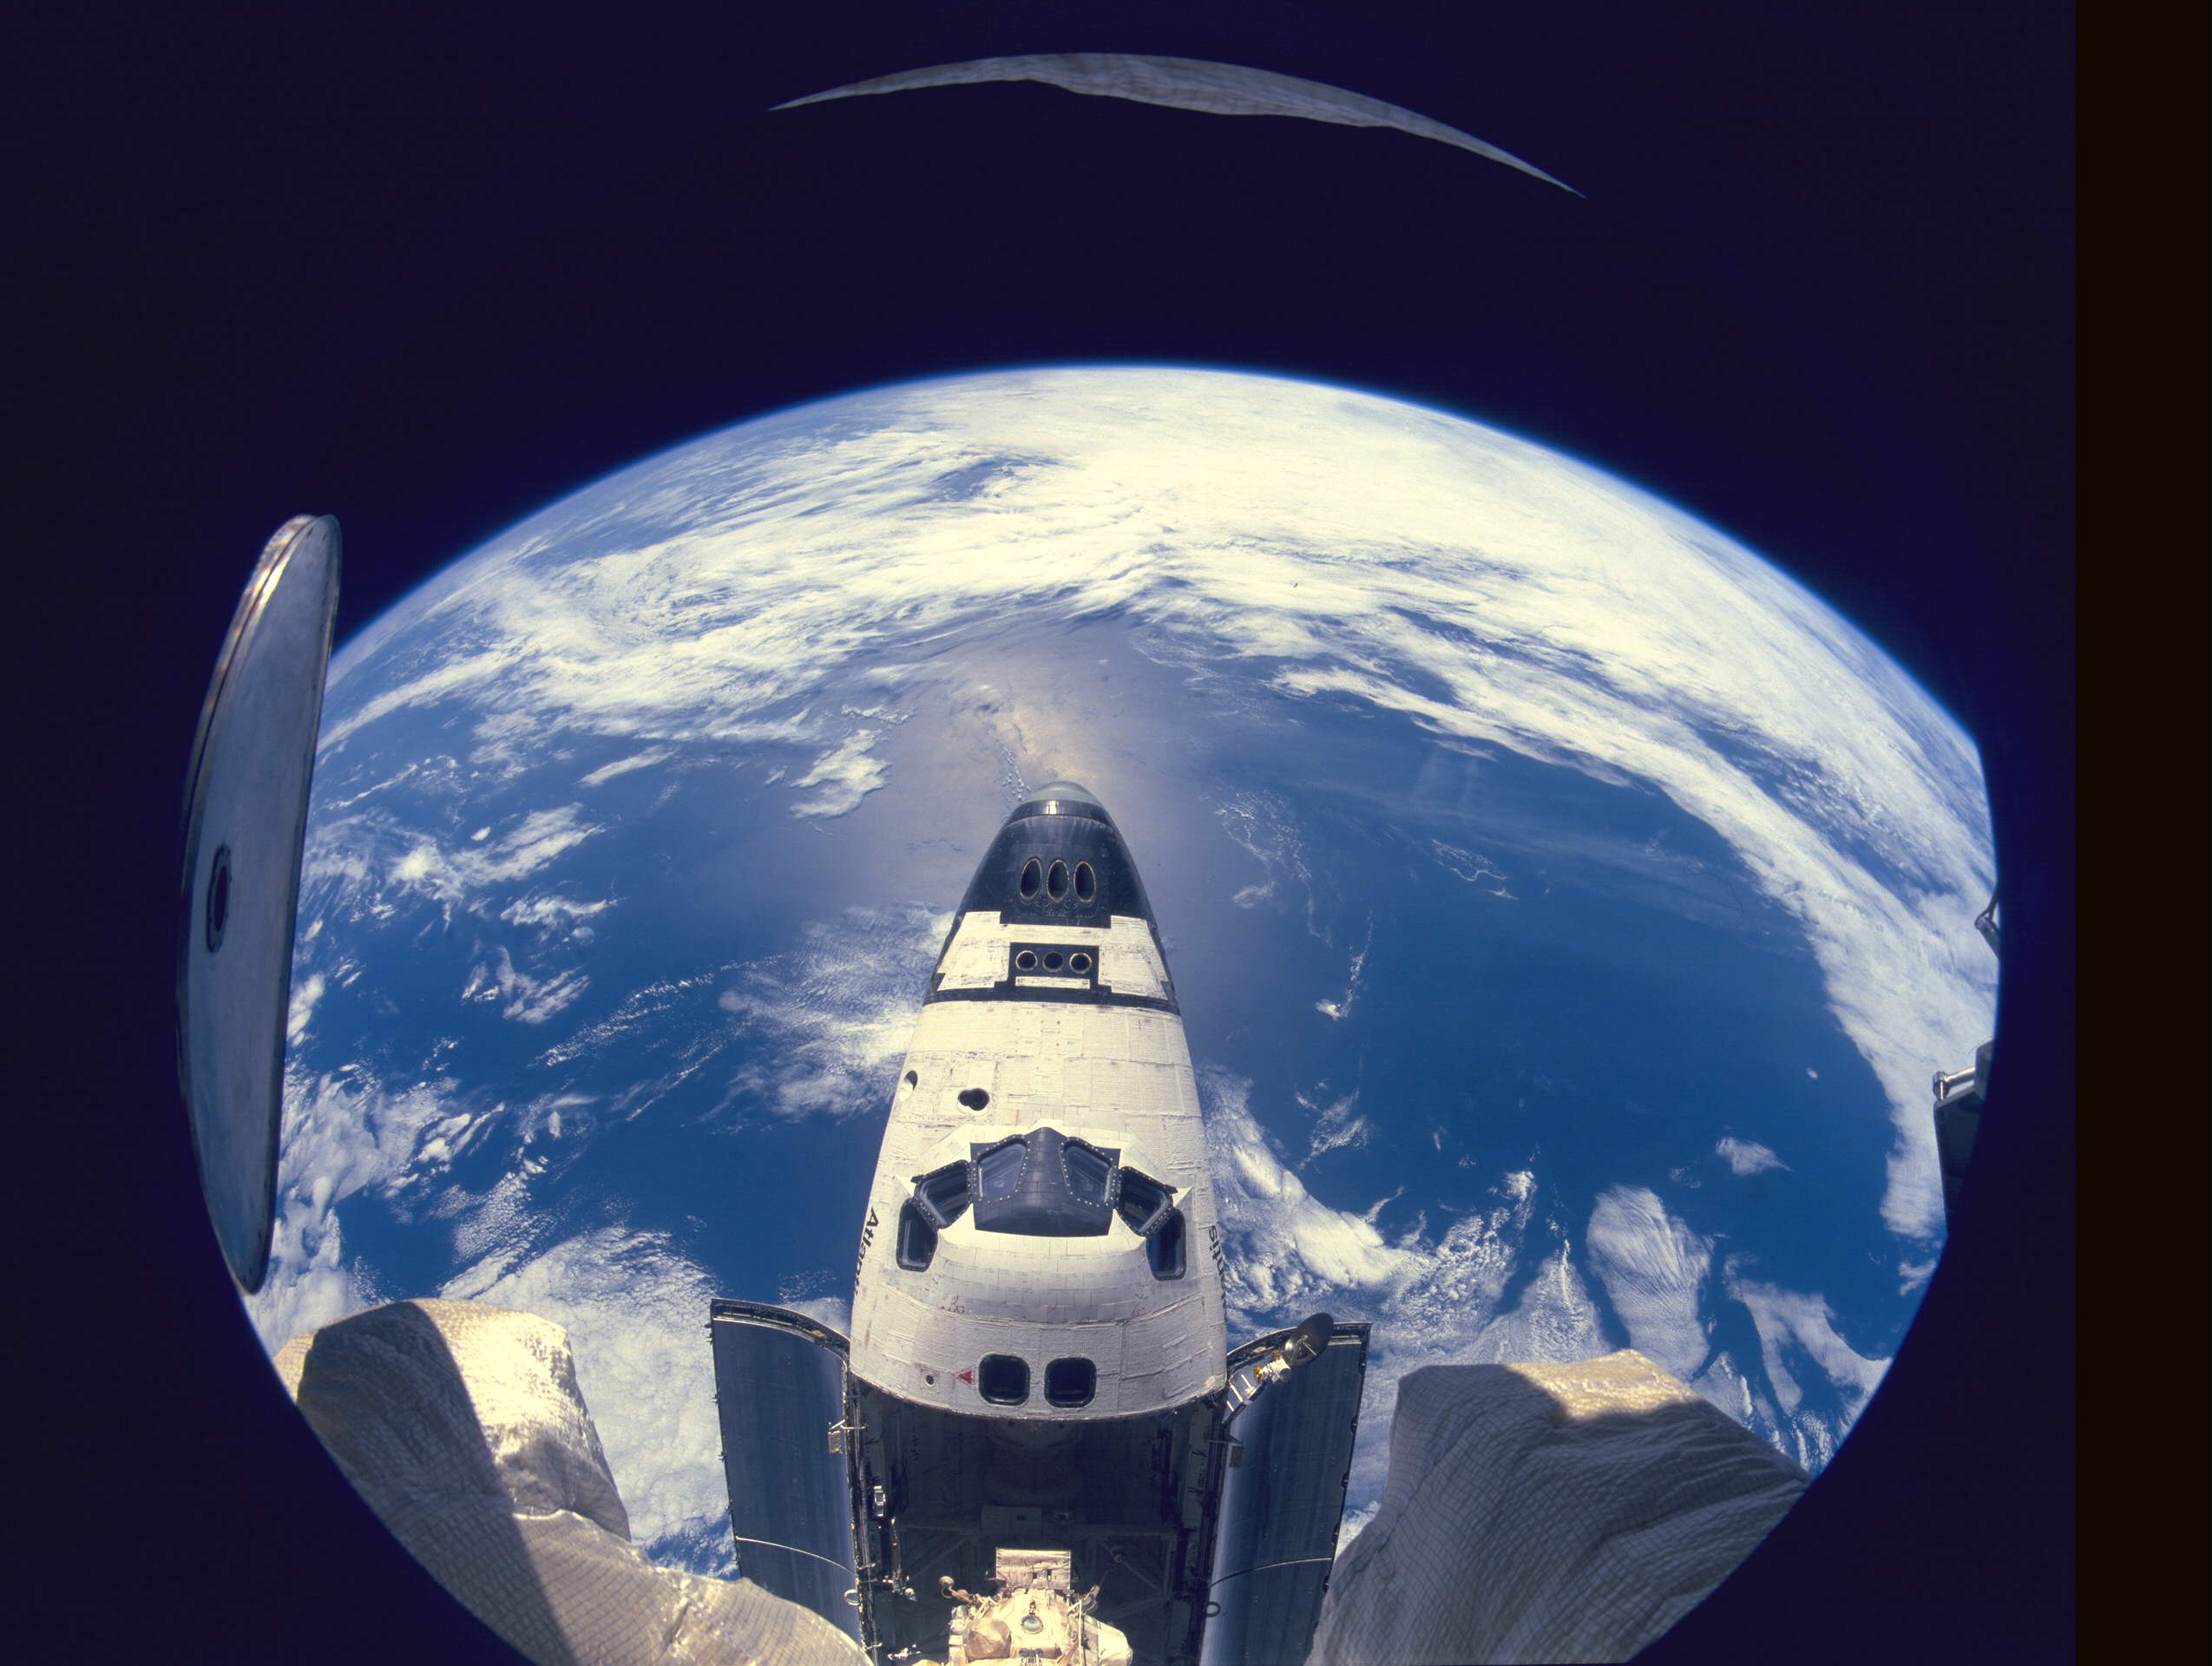 Space Shuttle Atlantis, as viewed through one of Mir's windows, during the extraordinary docking mission in June 1995. Photo Credit: NASA